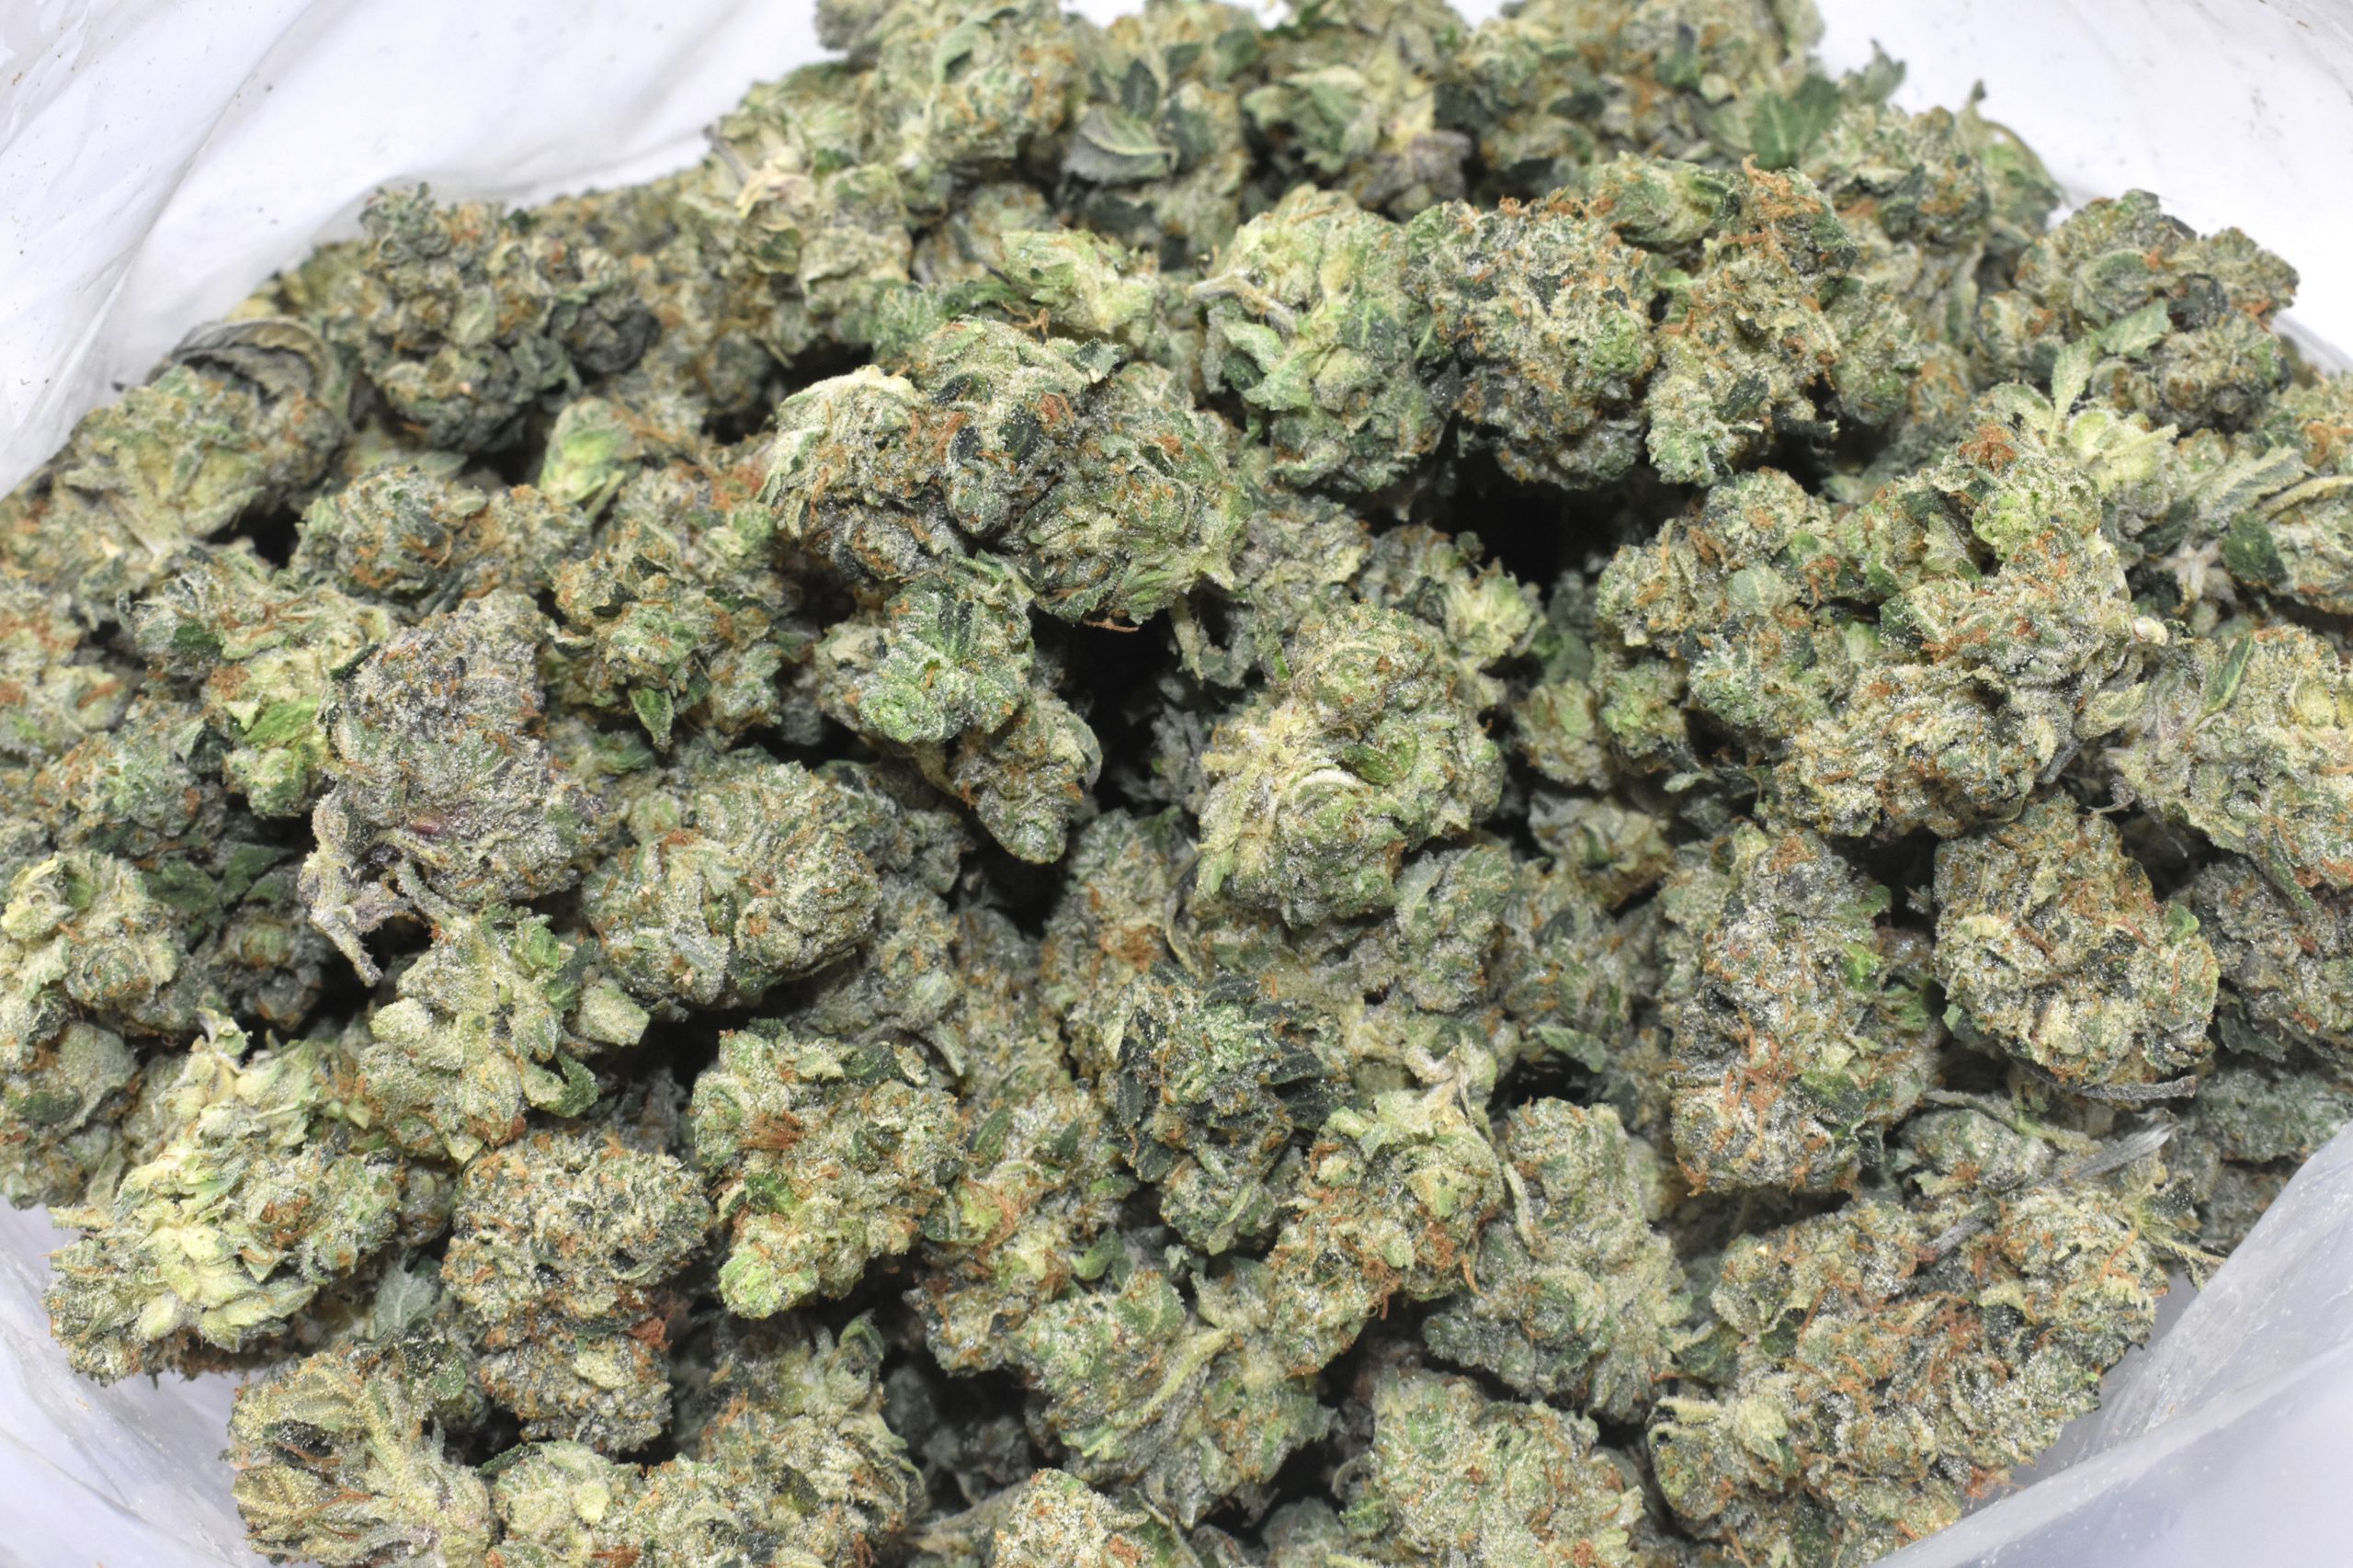 buy-platinum-gas-online-at-chronicfarms.cc-online-weed-dispensary-in-canada